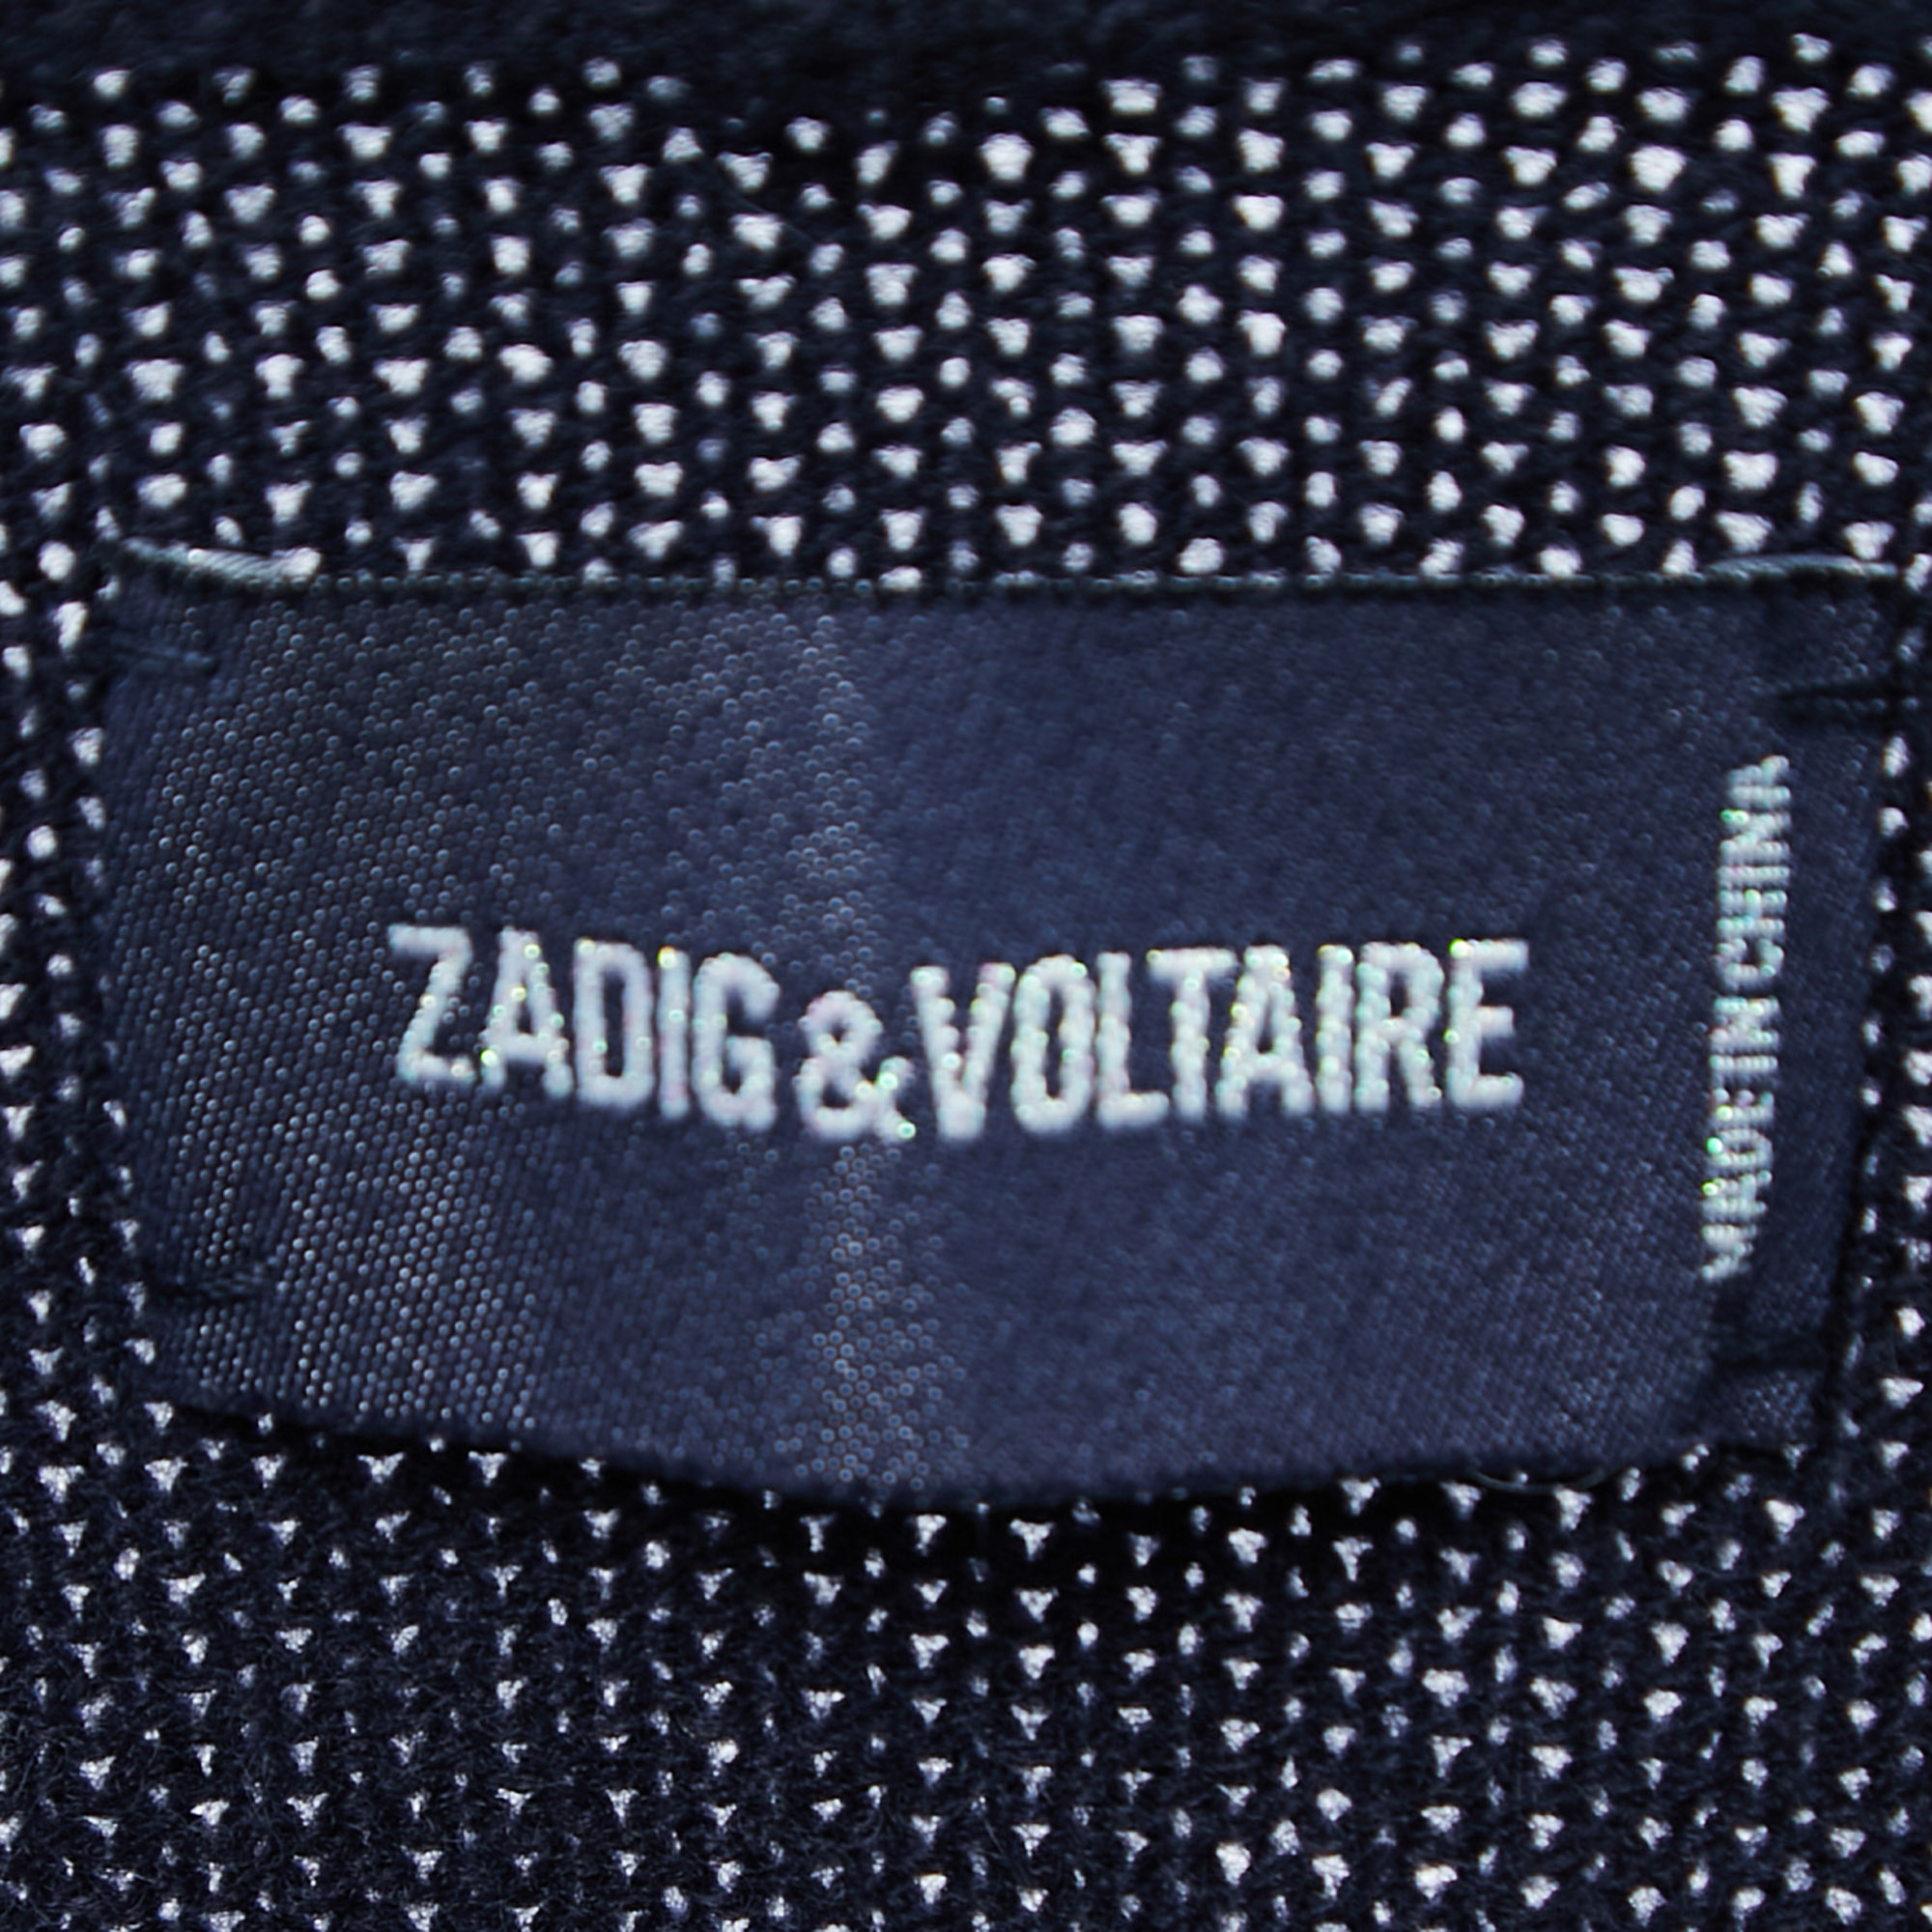 Zadig & Voltaire Encre Cashmere Knit Sixtine C Skull Hooded Sweater L